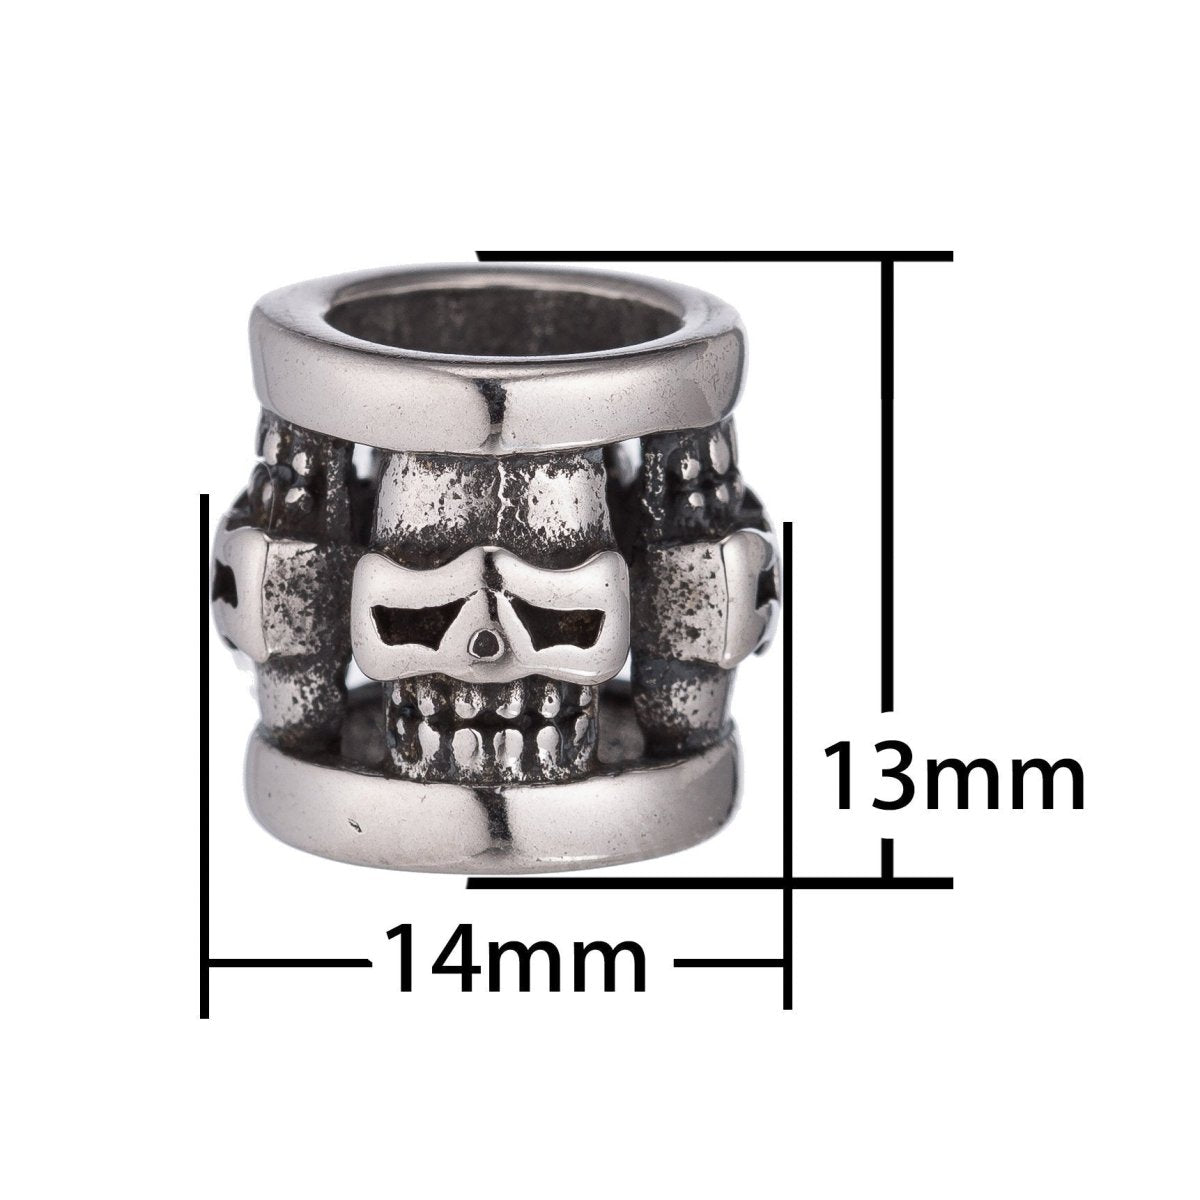 1pc Stainless Steel Silver Skull Crown Scary DIY Halloween Essential Pendant Bracelet Charm Bead Finding Connector Spacer for Jewelry Making - DLUXCA